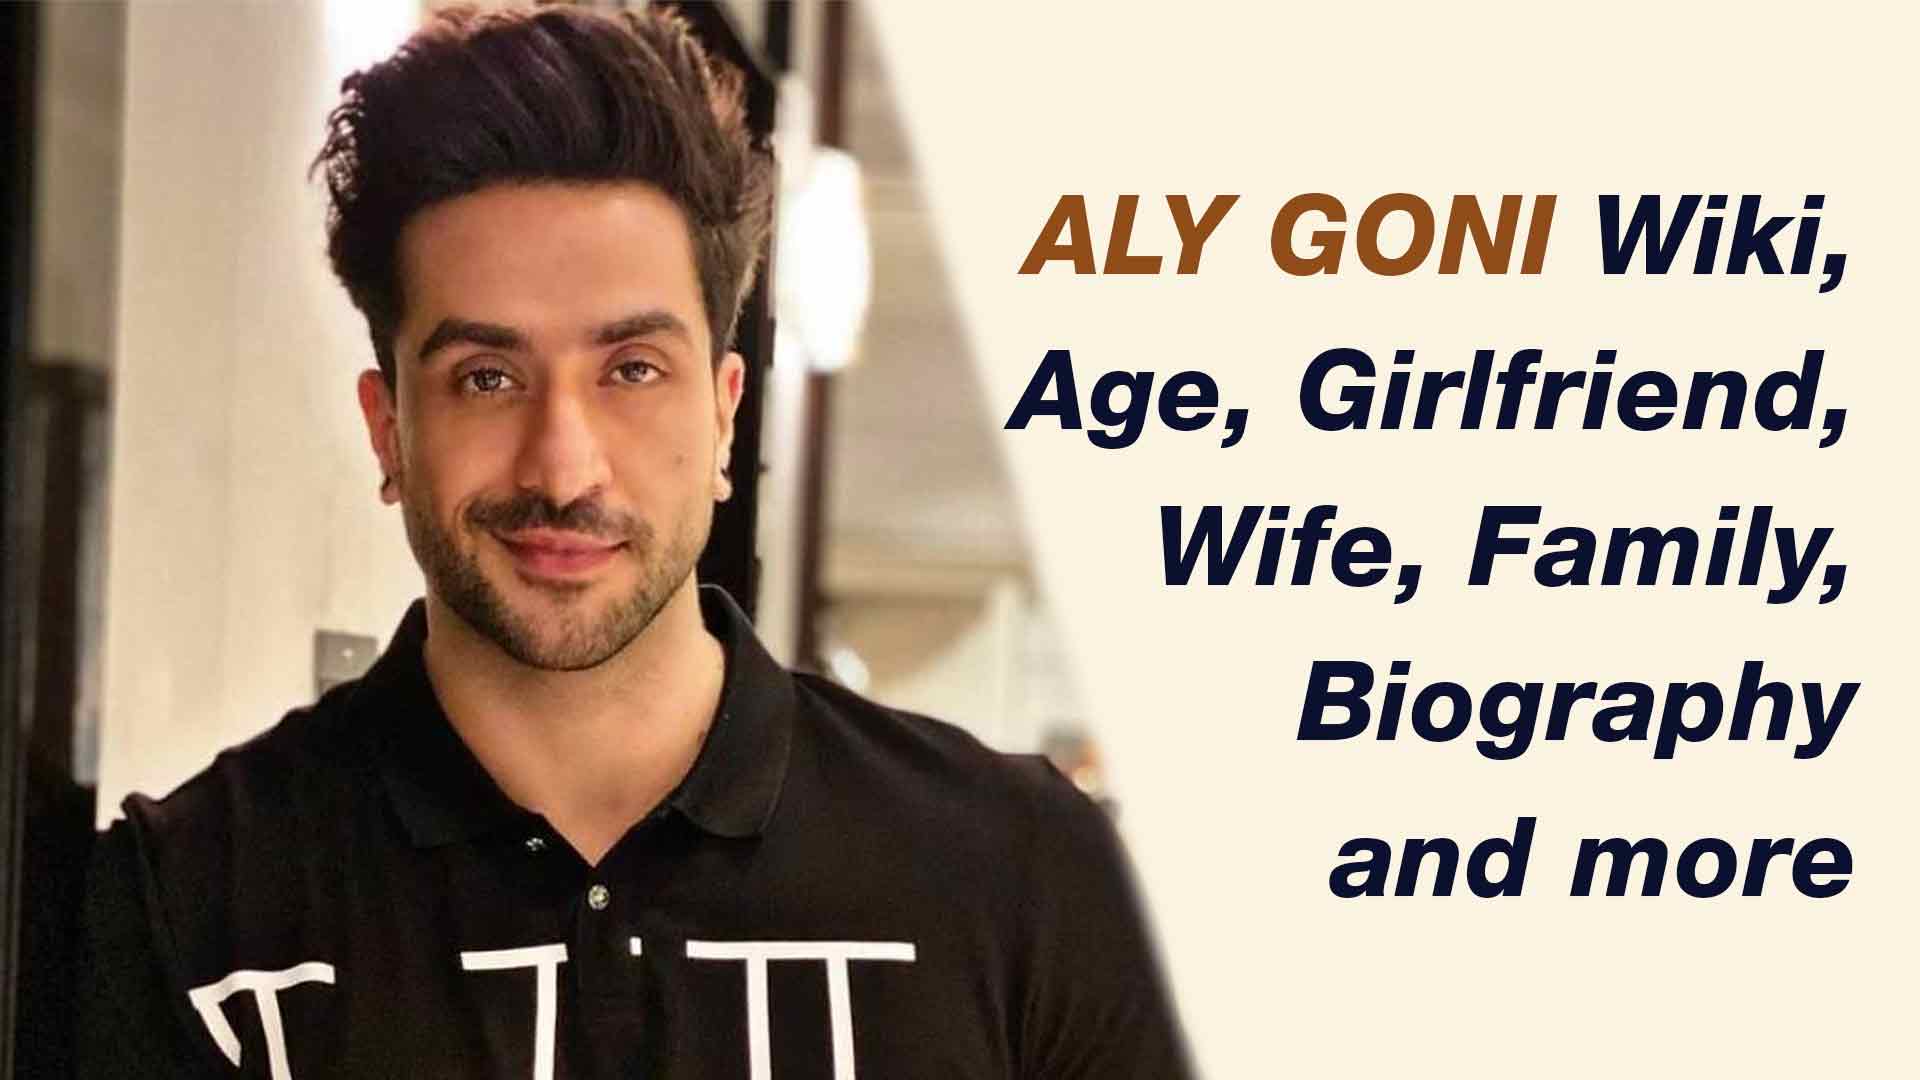 Aly Goni Wiki, Aly Goni Age, Aly Goni Girlfriend, Aly Goni Wife, Aly Goni Family, Aly Goni Personal imformation Aly Goni Biography About Aly Goni Aly Goni in english biography